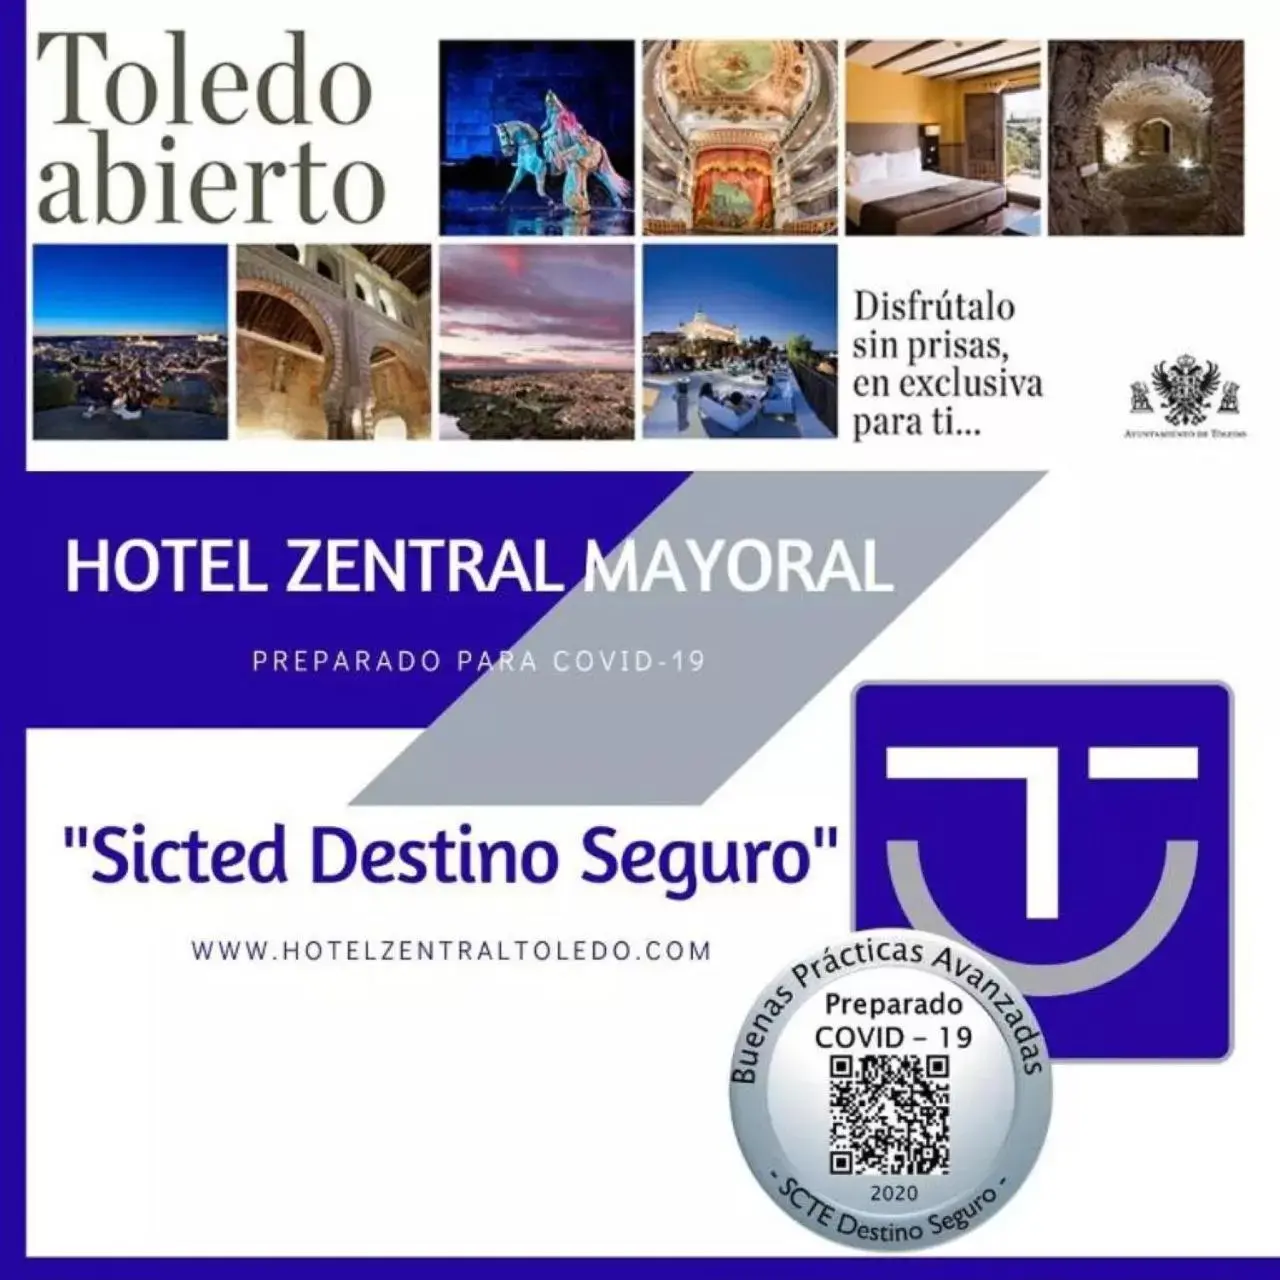 Logo/Certificate/Sign, Logo/Certificate/Sign/Award in Hotel Zentral Mayoral